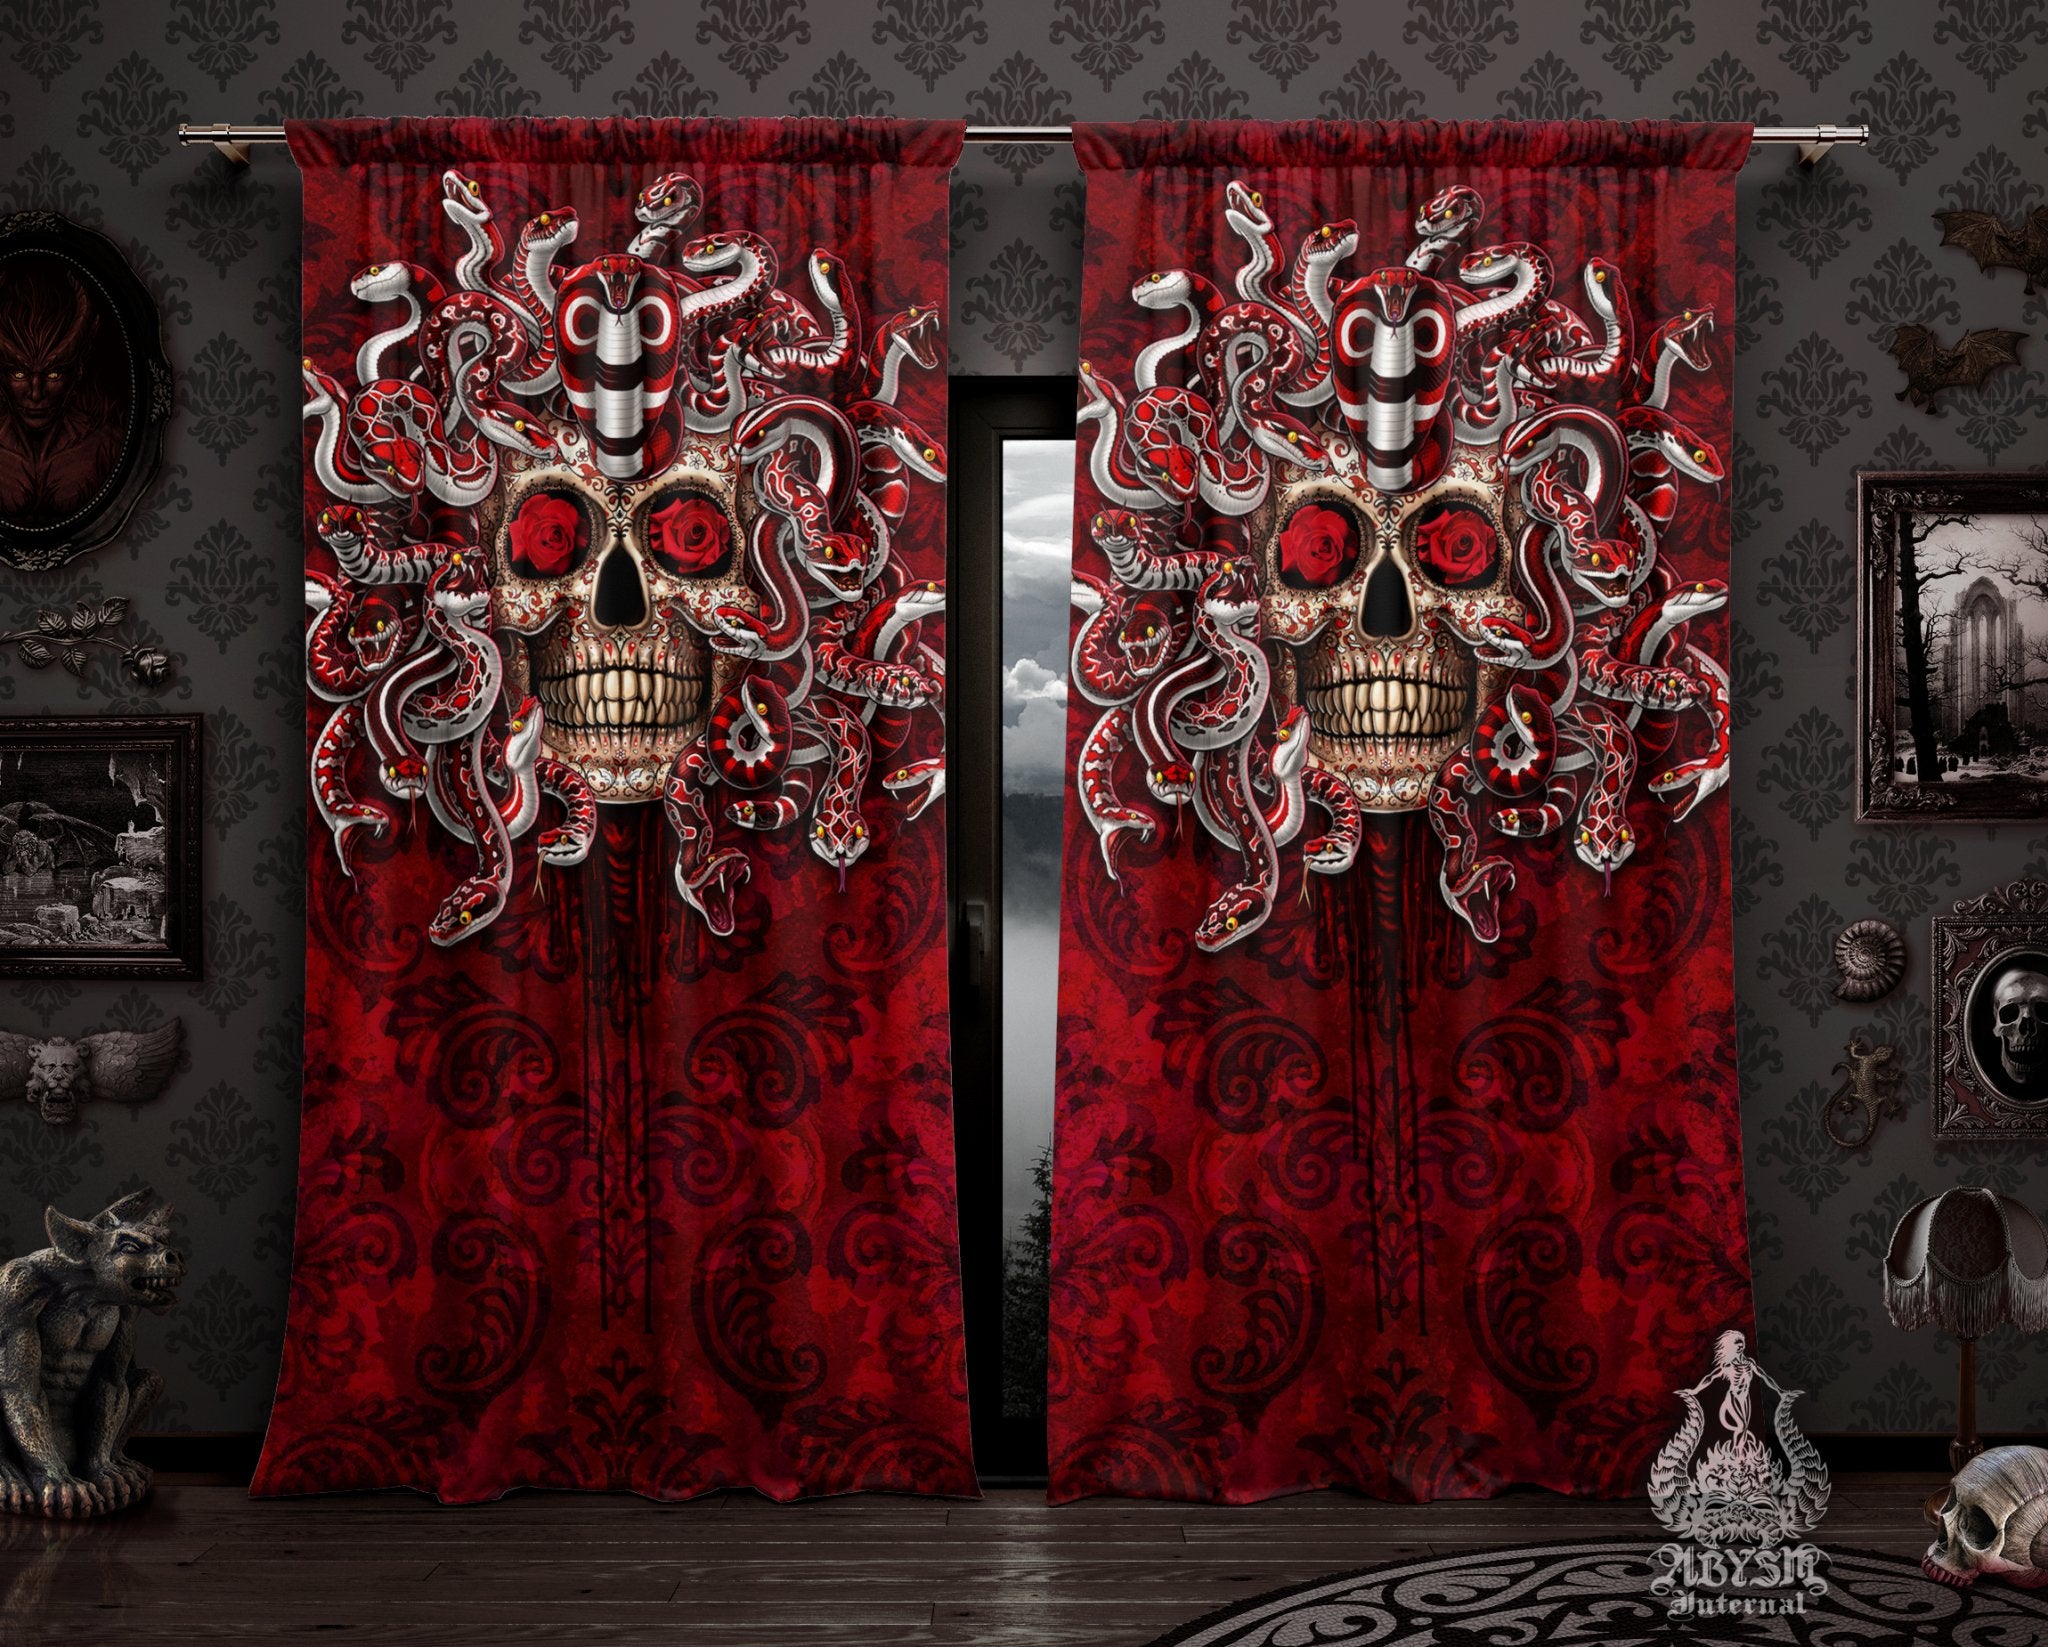 Sugar Skull Curtains, 50x84' Printed Window Panels, Day of the Dead, Dia de los Muertos, Gothic Home Decor, Art Print - Red Medusa & Snakes - Abysm Internal